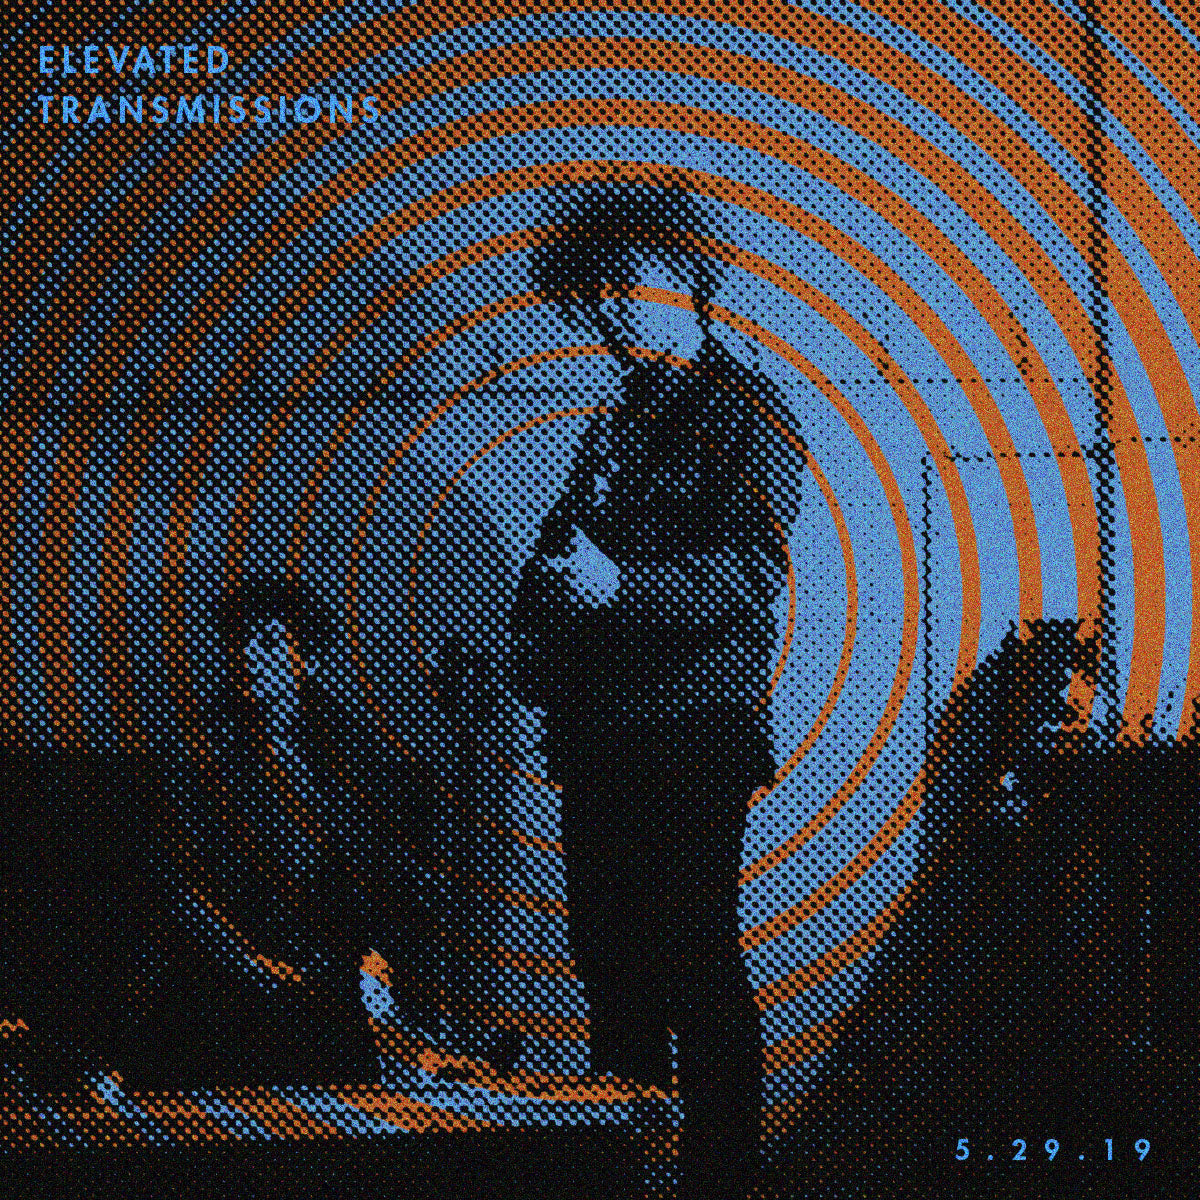 ELEVATED TRANSMISSIONS | 5.29.19